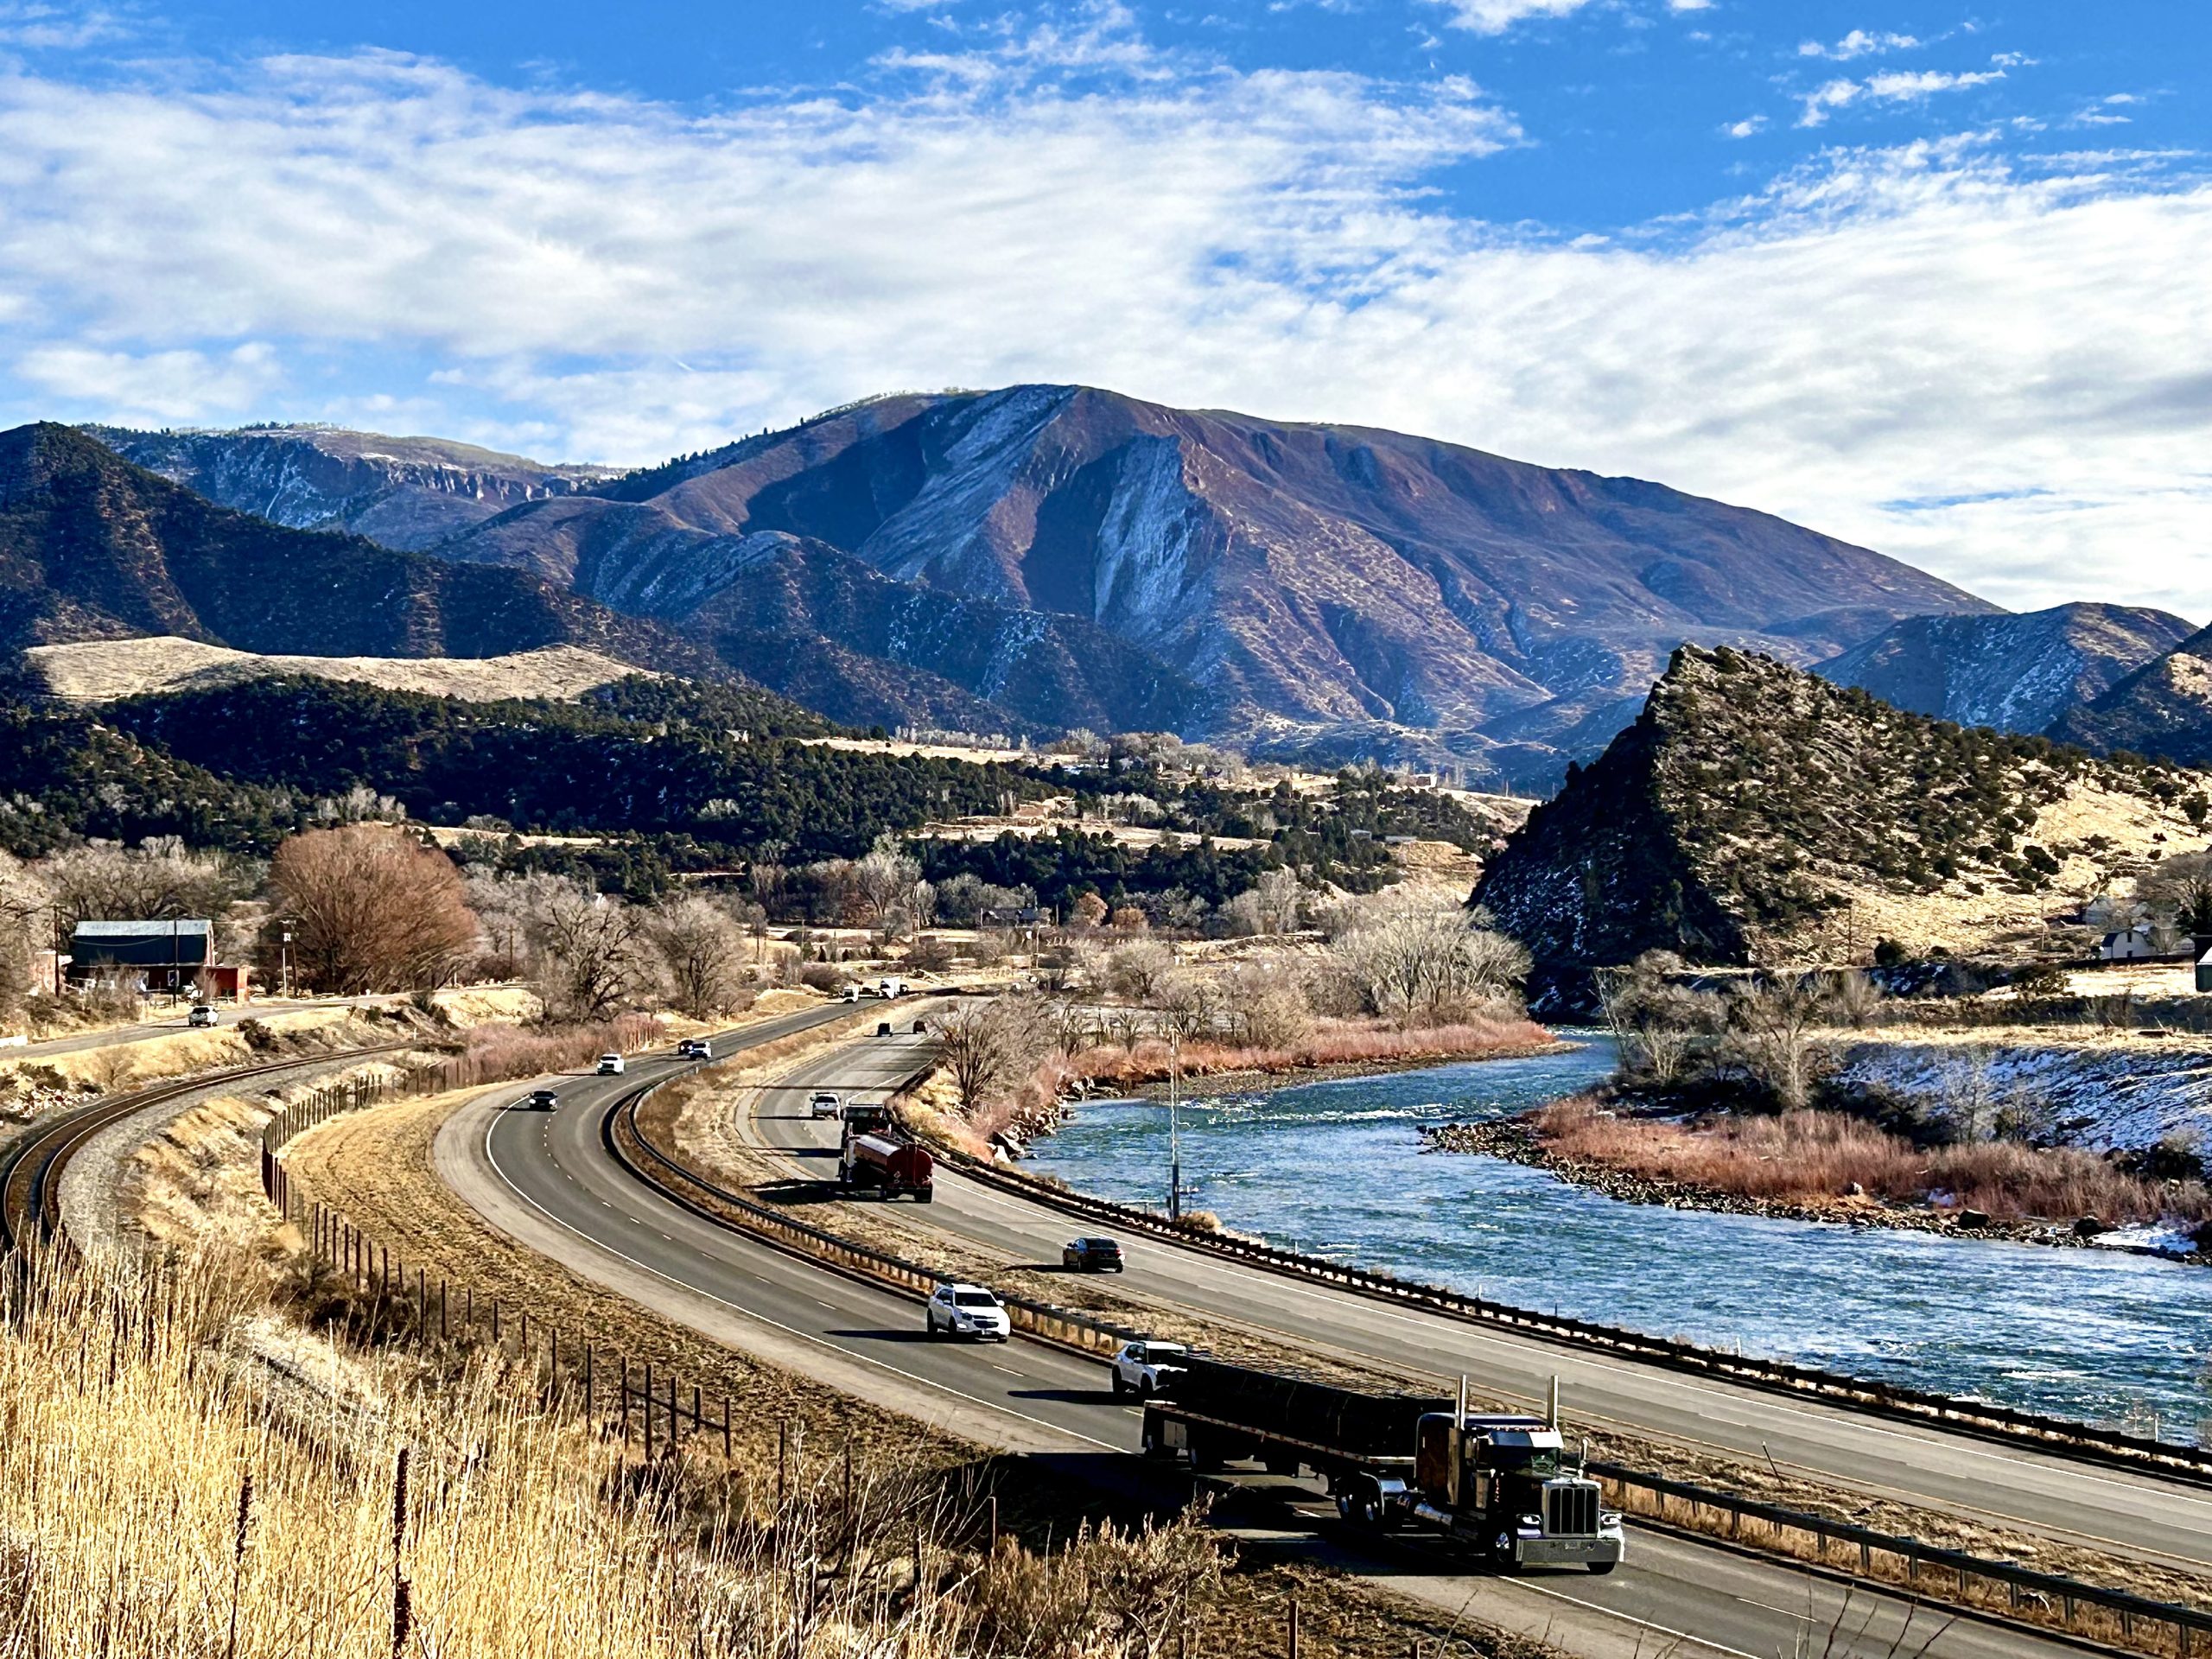 nterstate 70 follows the Colorado River through a transitional landscape between New Castle and Glenwood Springs.